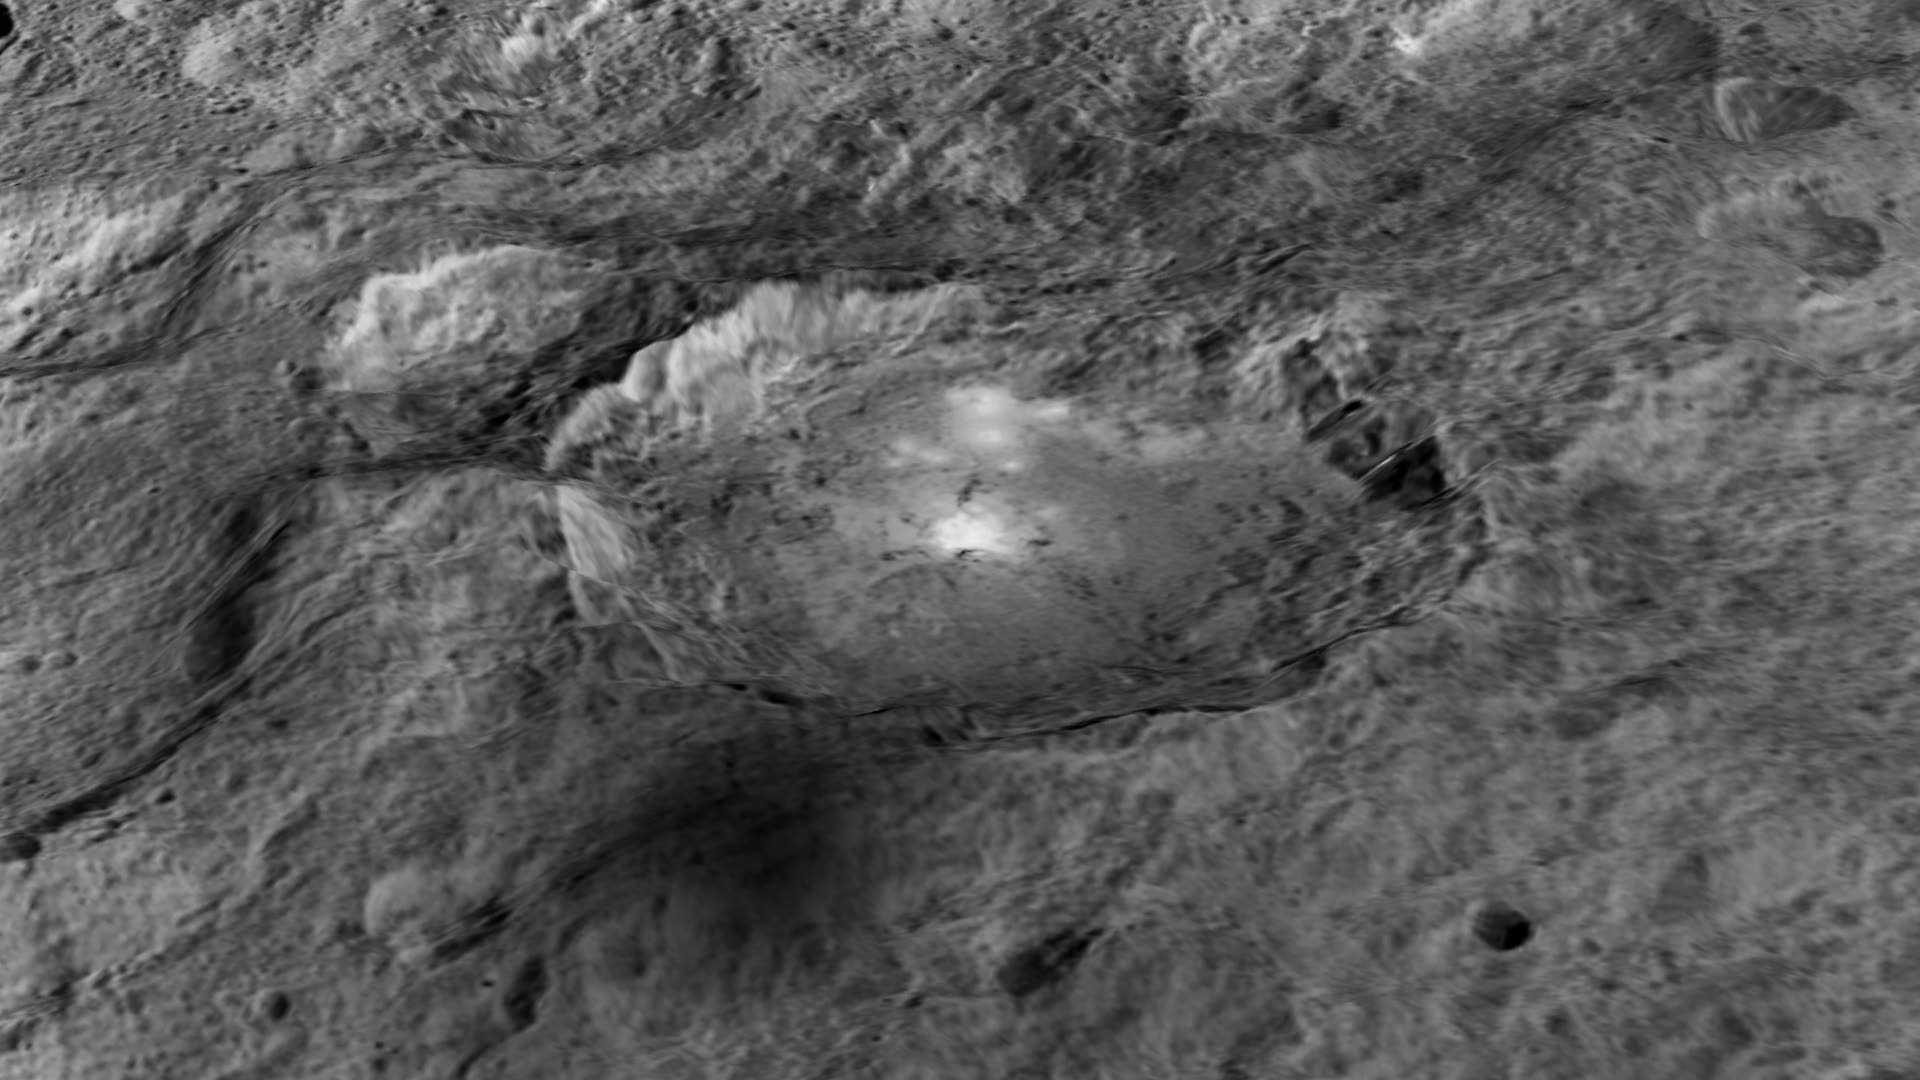 The intriguing brightest spots on Ceres lie in a crater named Occator, which is about 60 miles (90 kilometers) across and 2 miles (4 kilometers) deep.  Vertical relief has been exaggerated by a factor of five. Exaggerating the relief helps scientists understand and visualize the topography much more easily, and highlights features that are sometimes subtle.  Credits: NASA/JPL-Caltech/UCLA/MPS/DLR/IDA/LPI